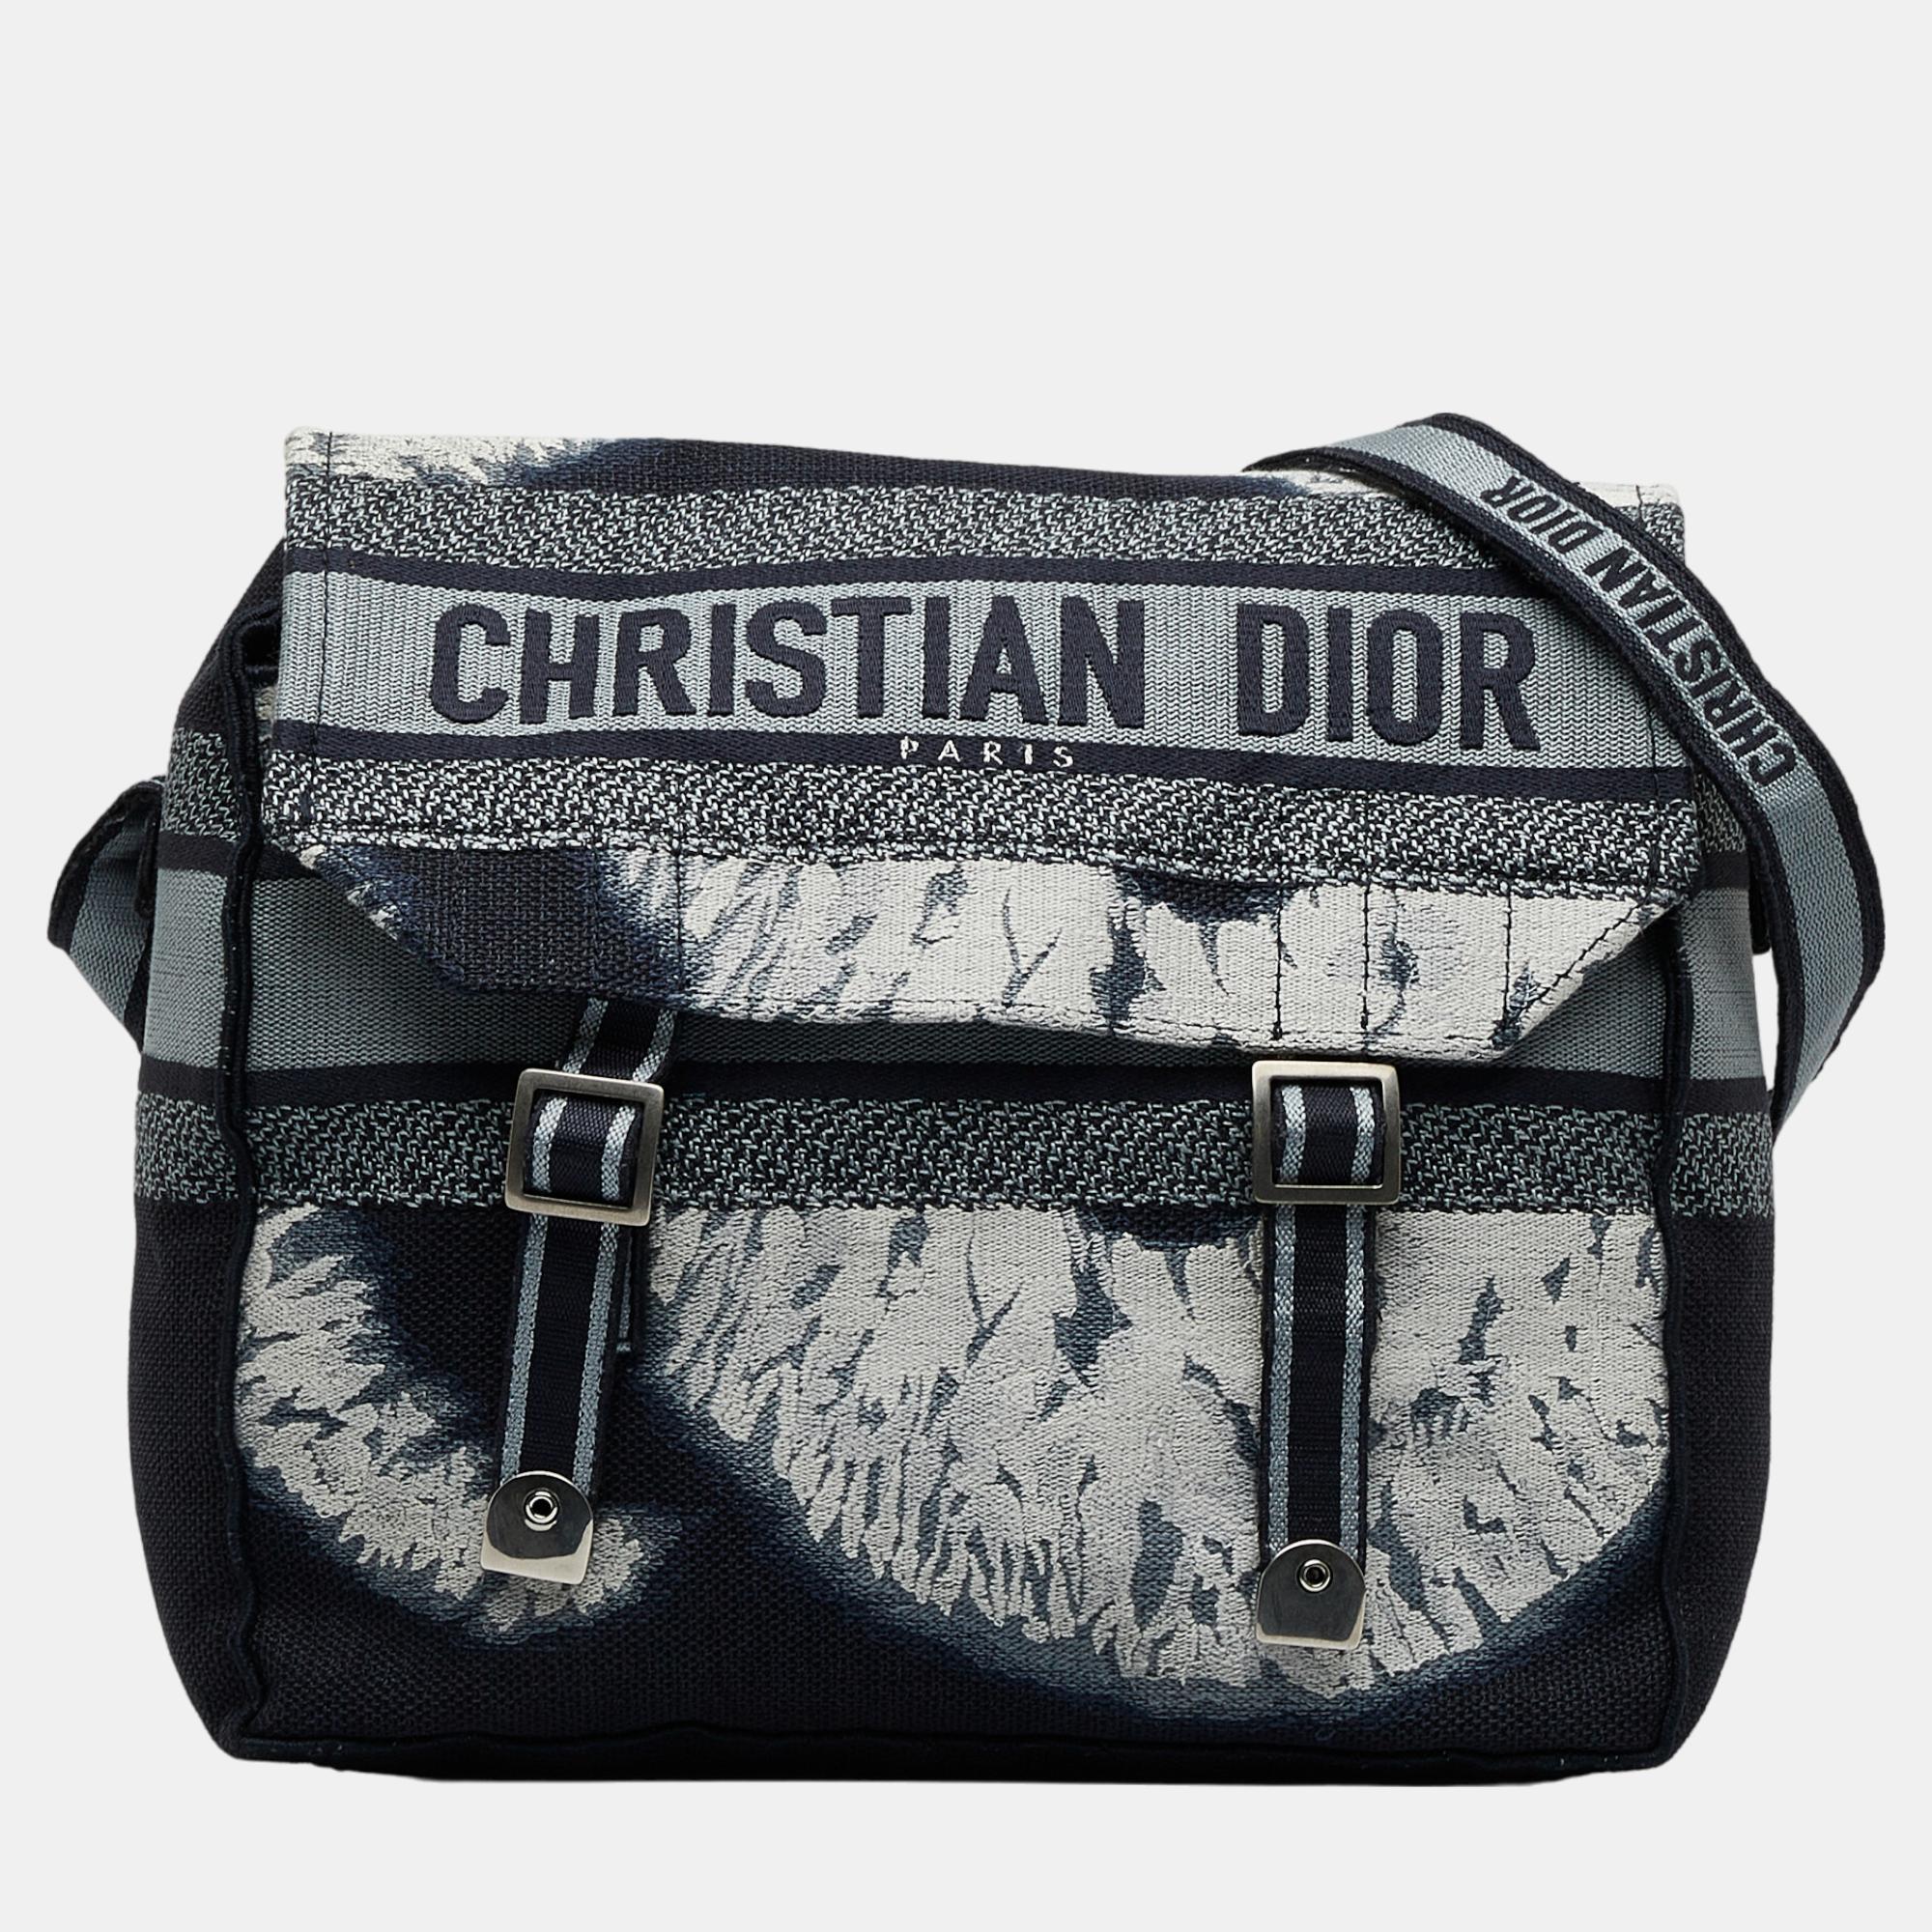 The Diorcamp messenger bag features a canvas body a flat strap a front flap and an interior slip pocket.